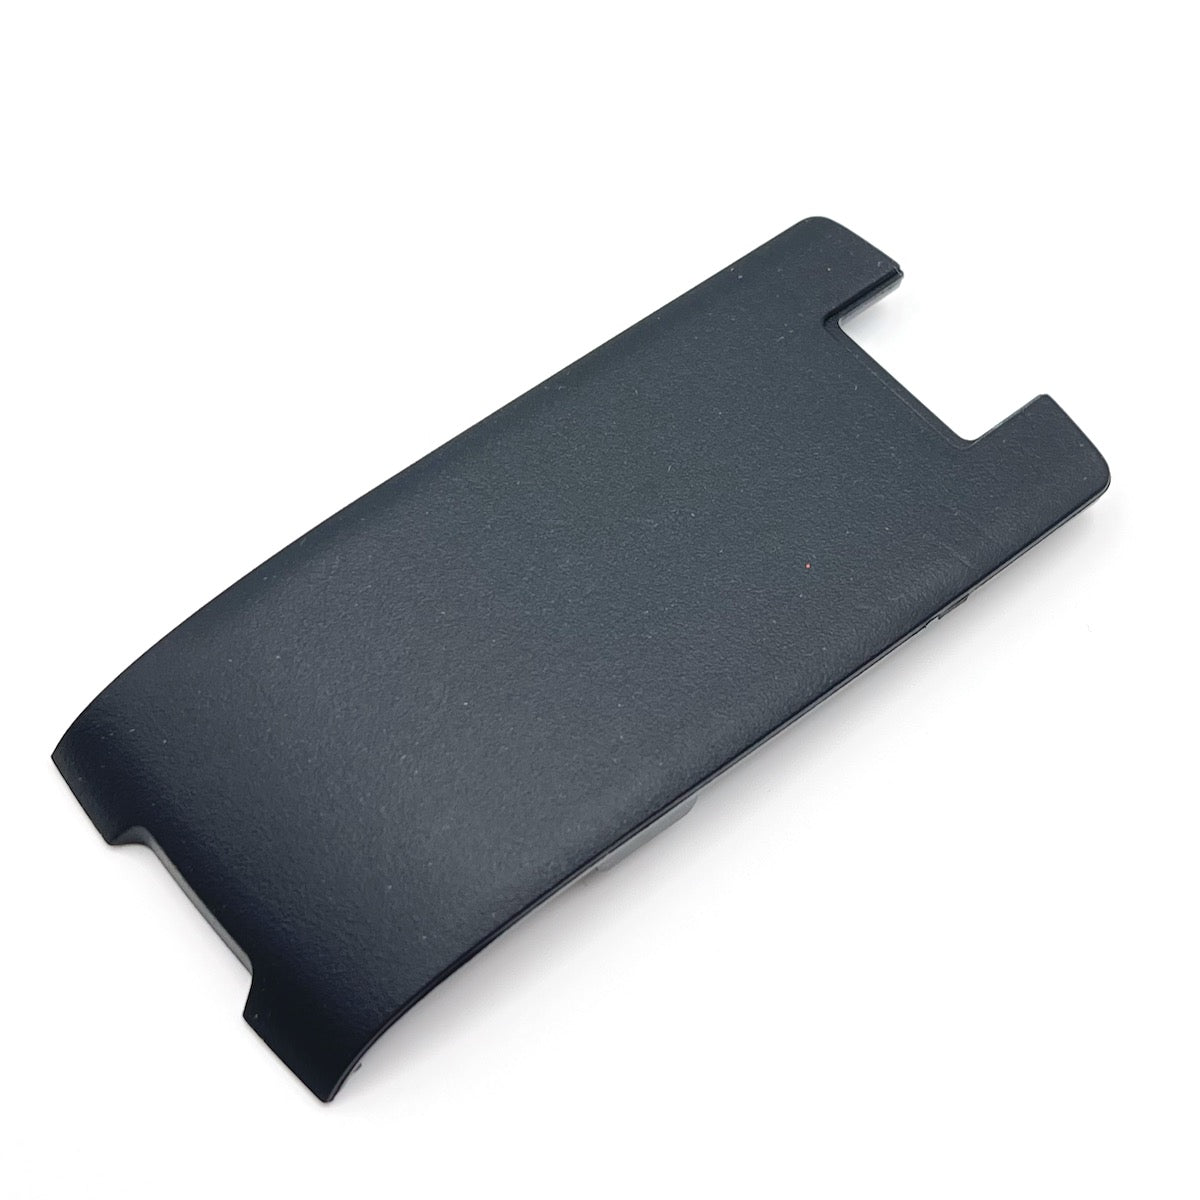 Battery Cover for Garmin GPSMAP 78 78s 78sc replacement part repair